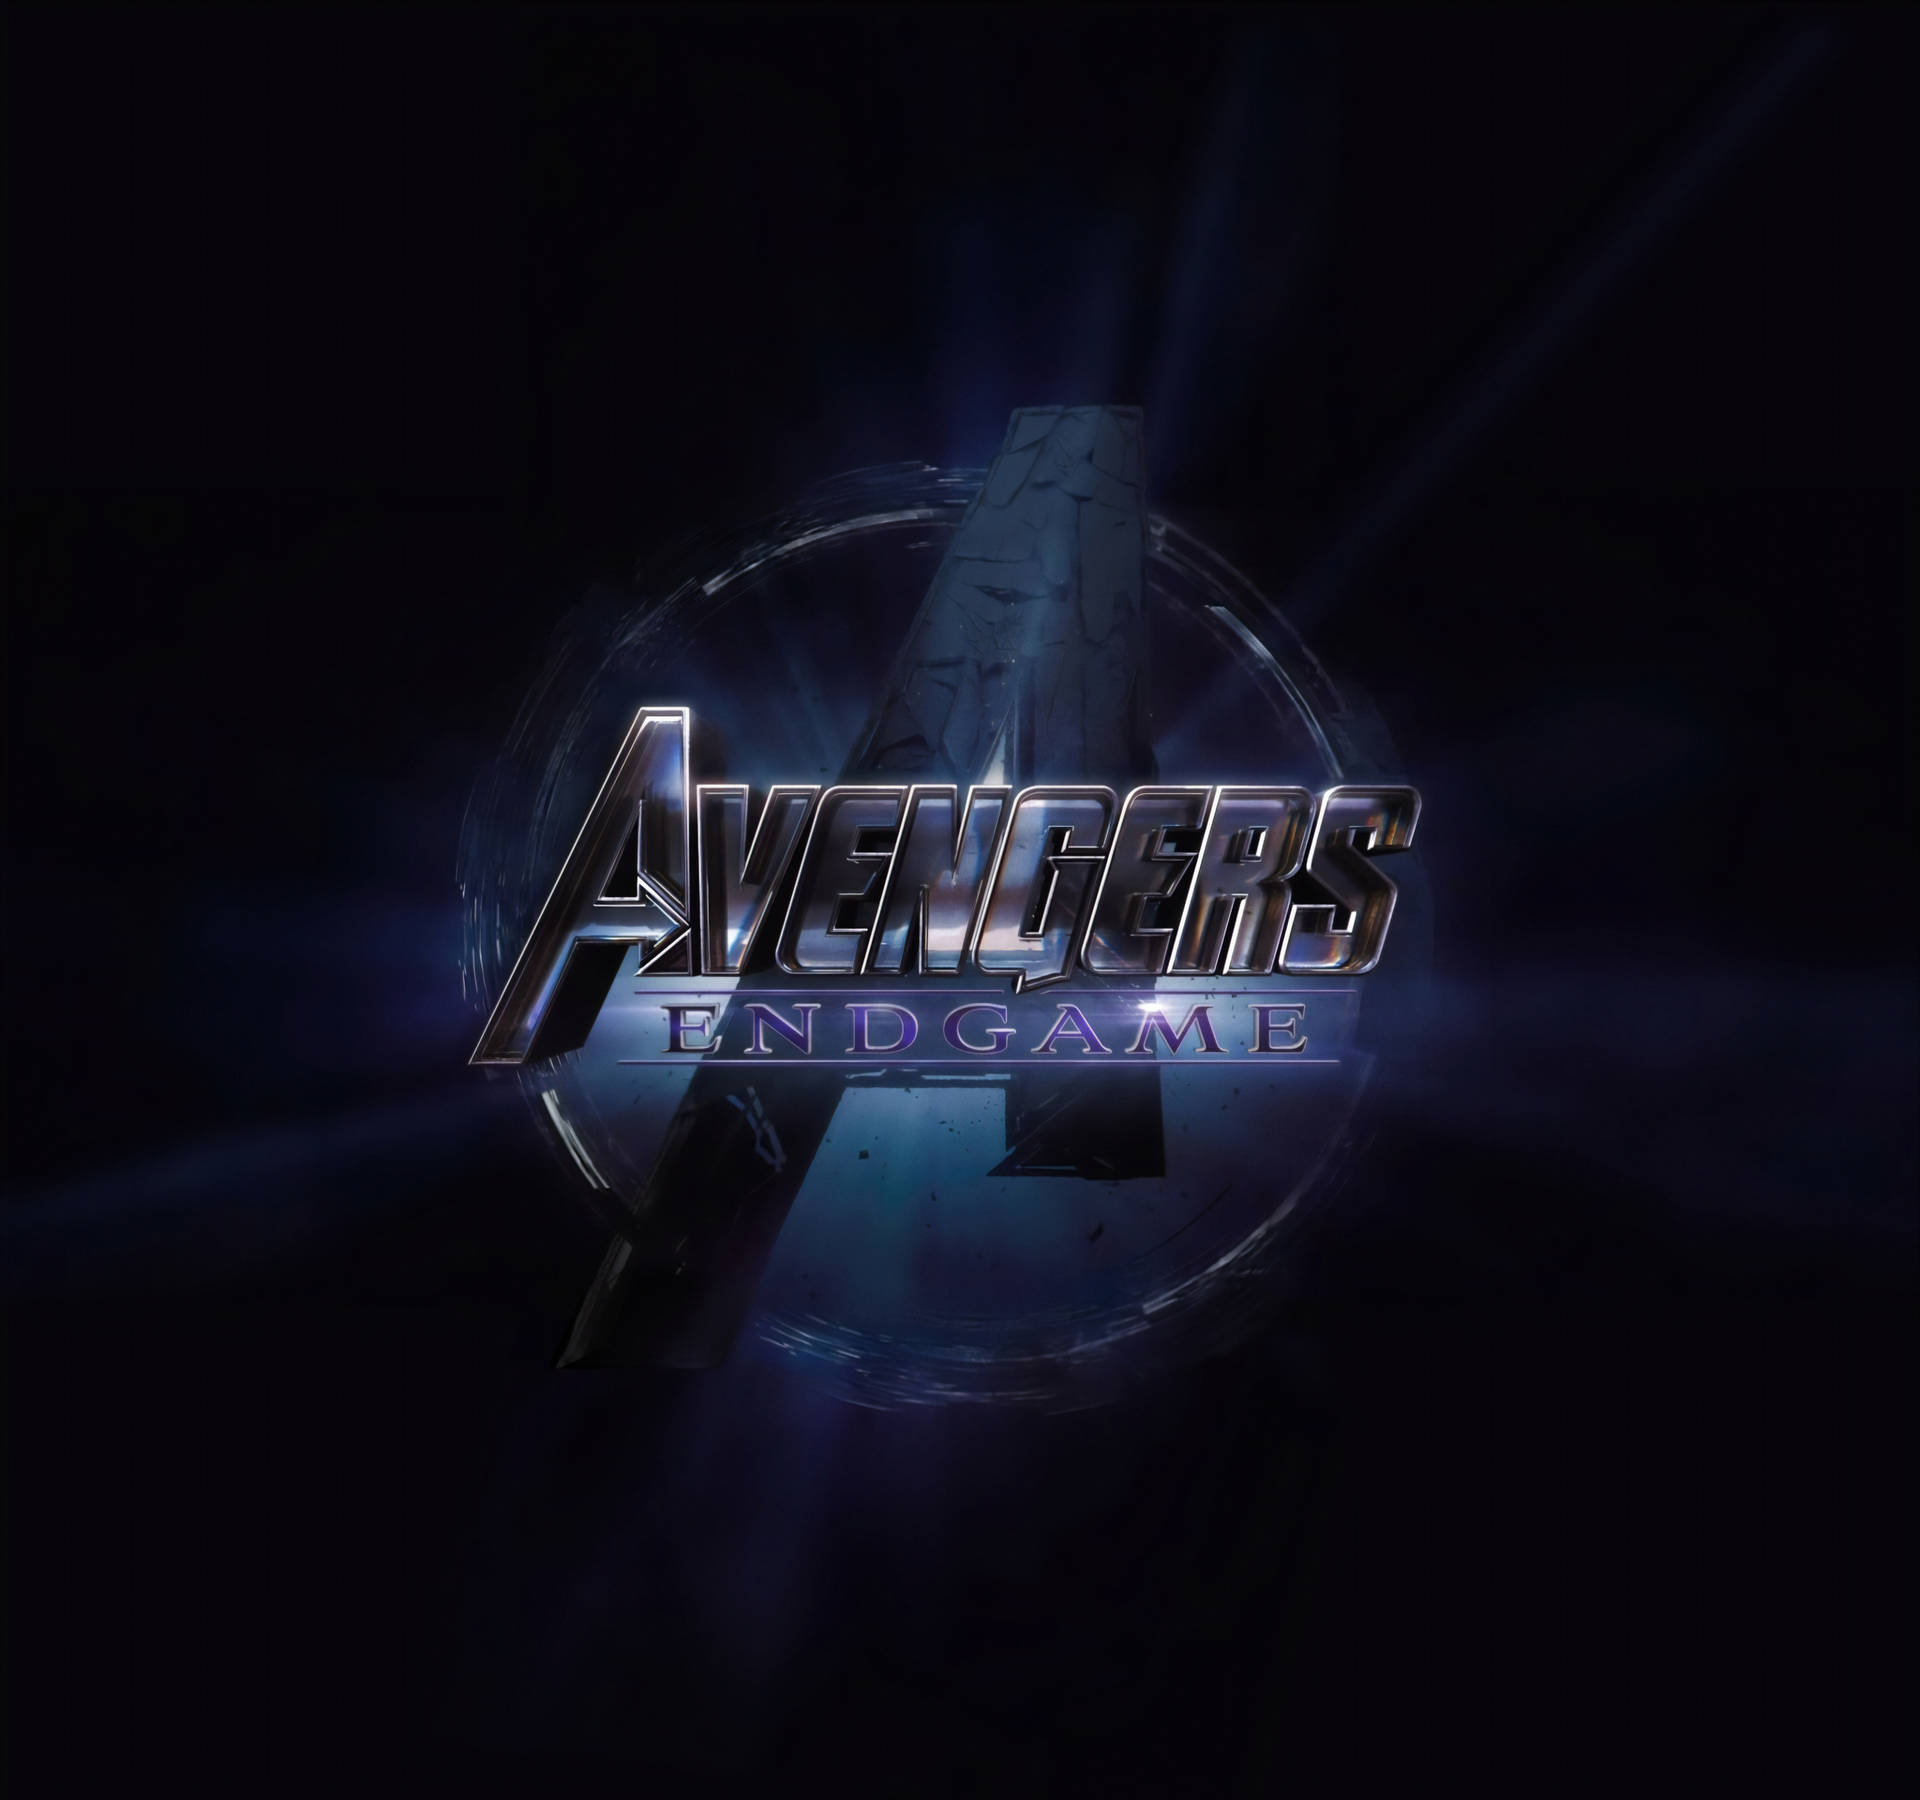 The Avengers Join Forces to Save the Universe Wallpaper